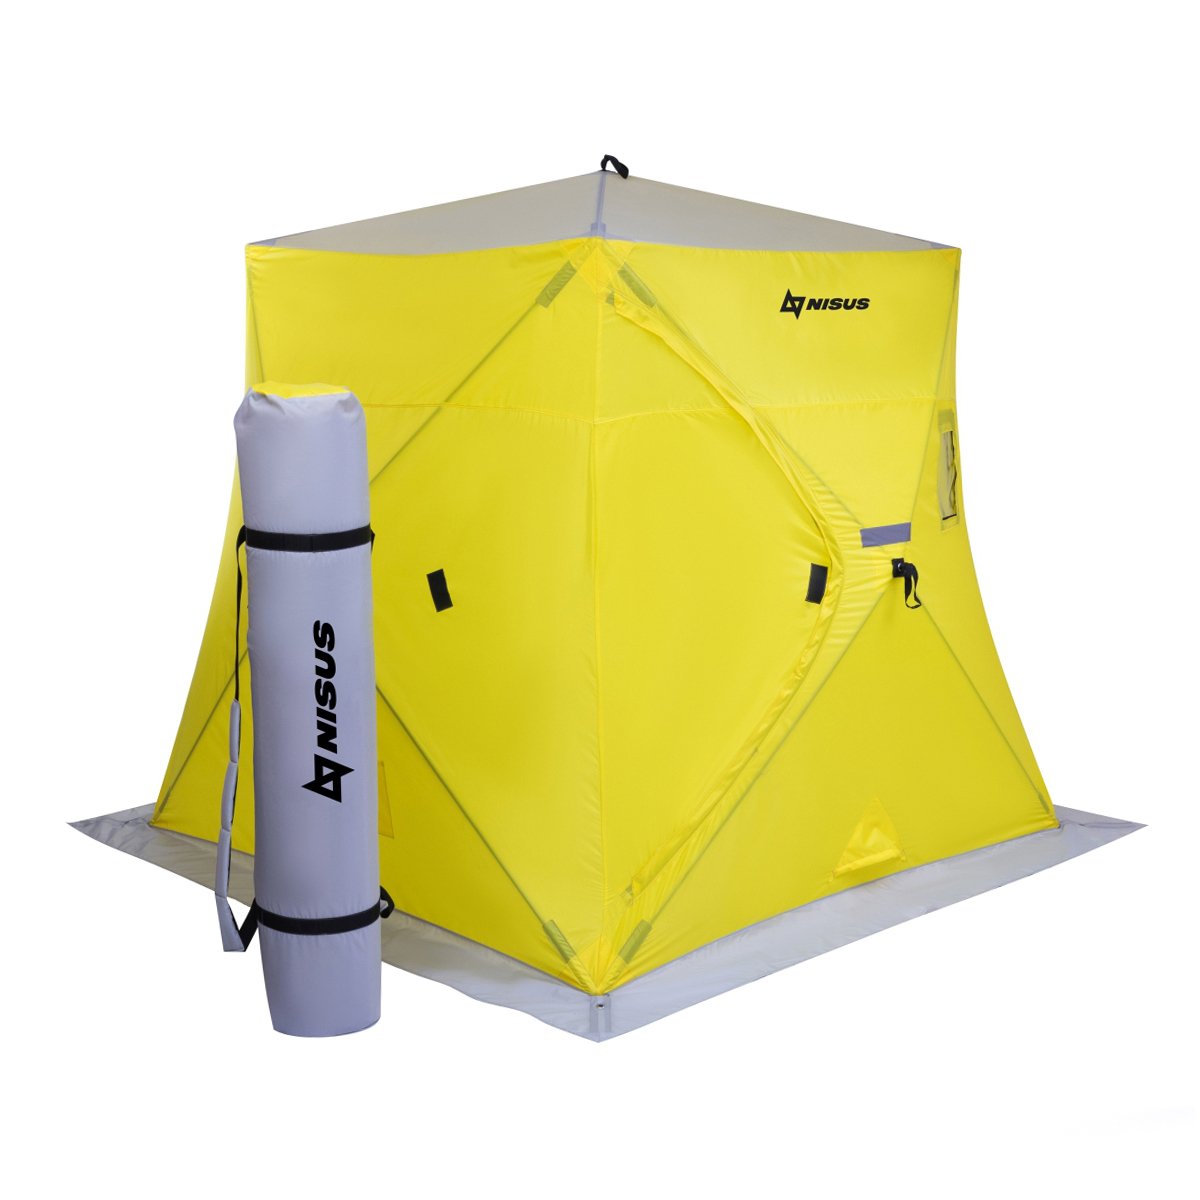 Prism Roomy Ice Fishing Shelter for 3 Persons has a carrying bag attached